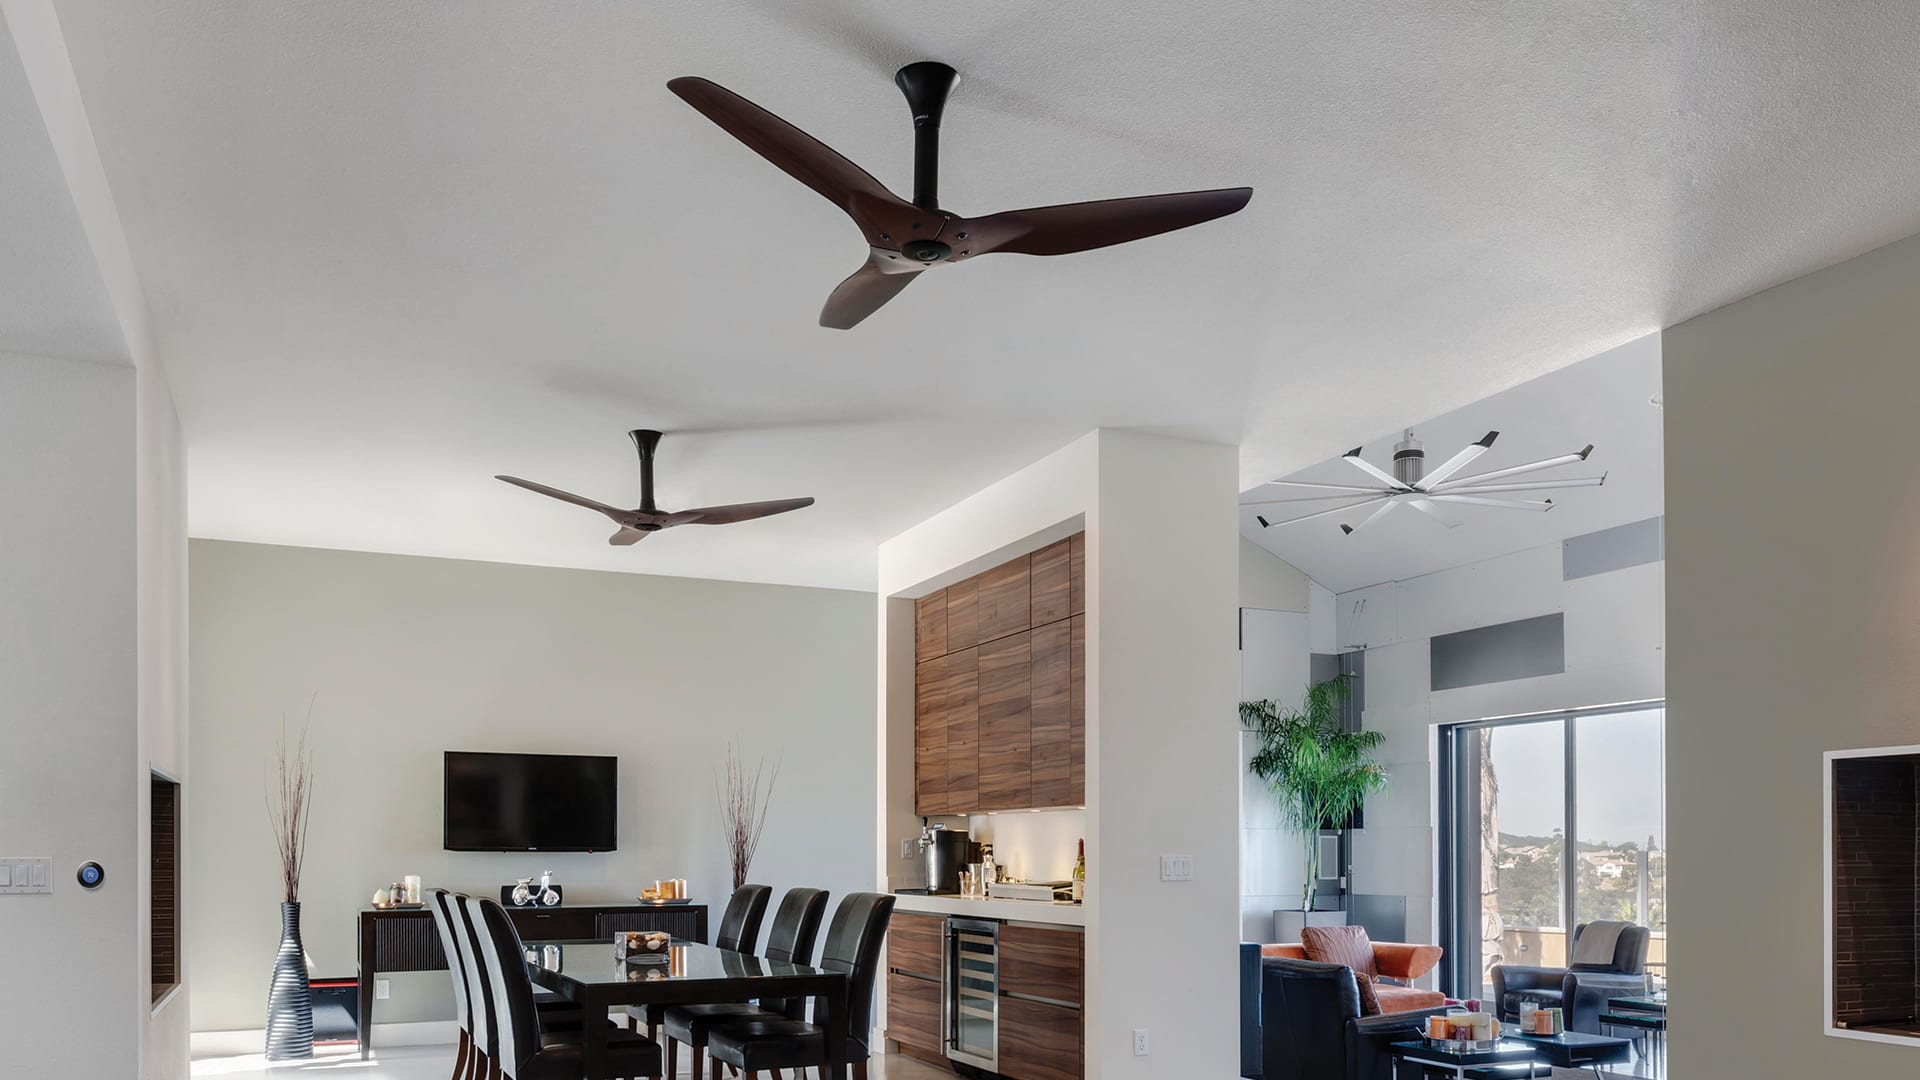 This Smart Ceiling Fan Links With Nest To Make Your AC More Cool–While Using Less Energy